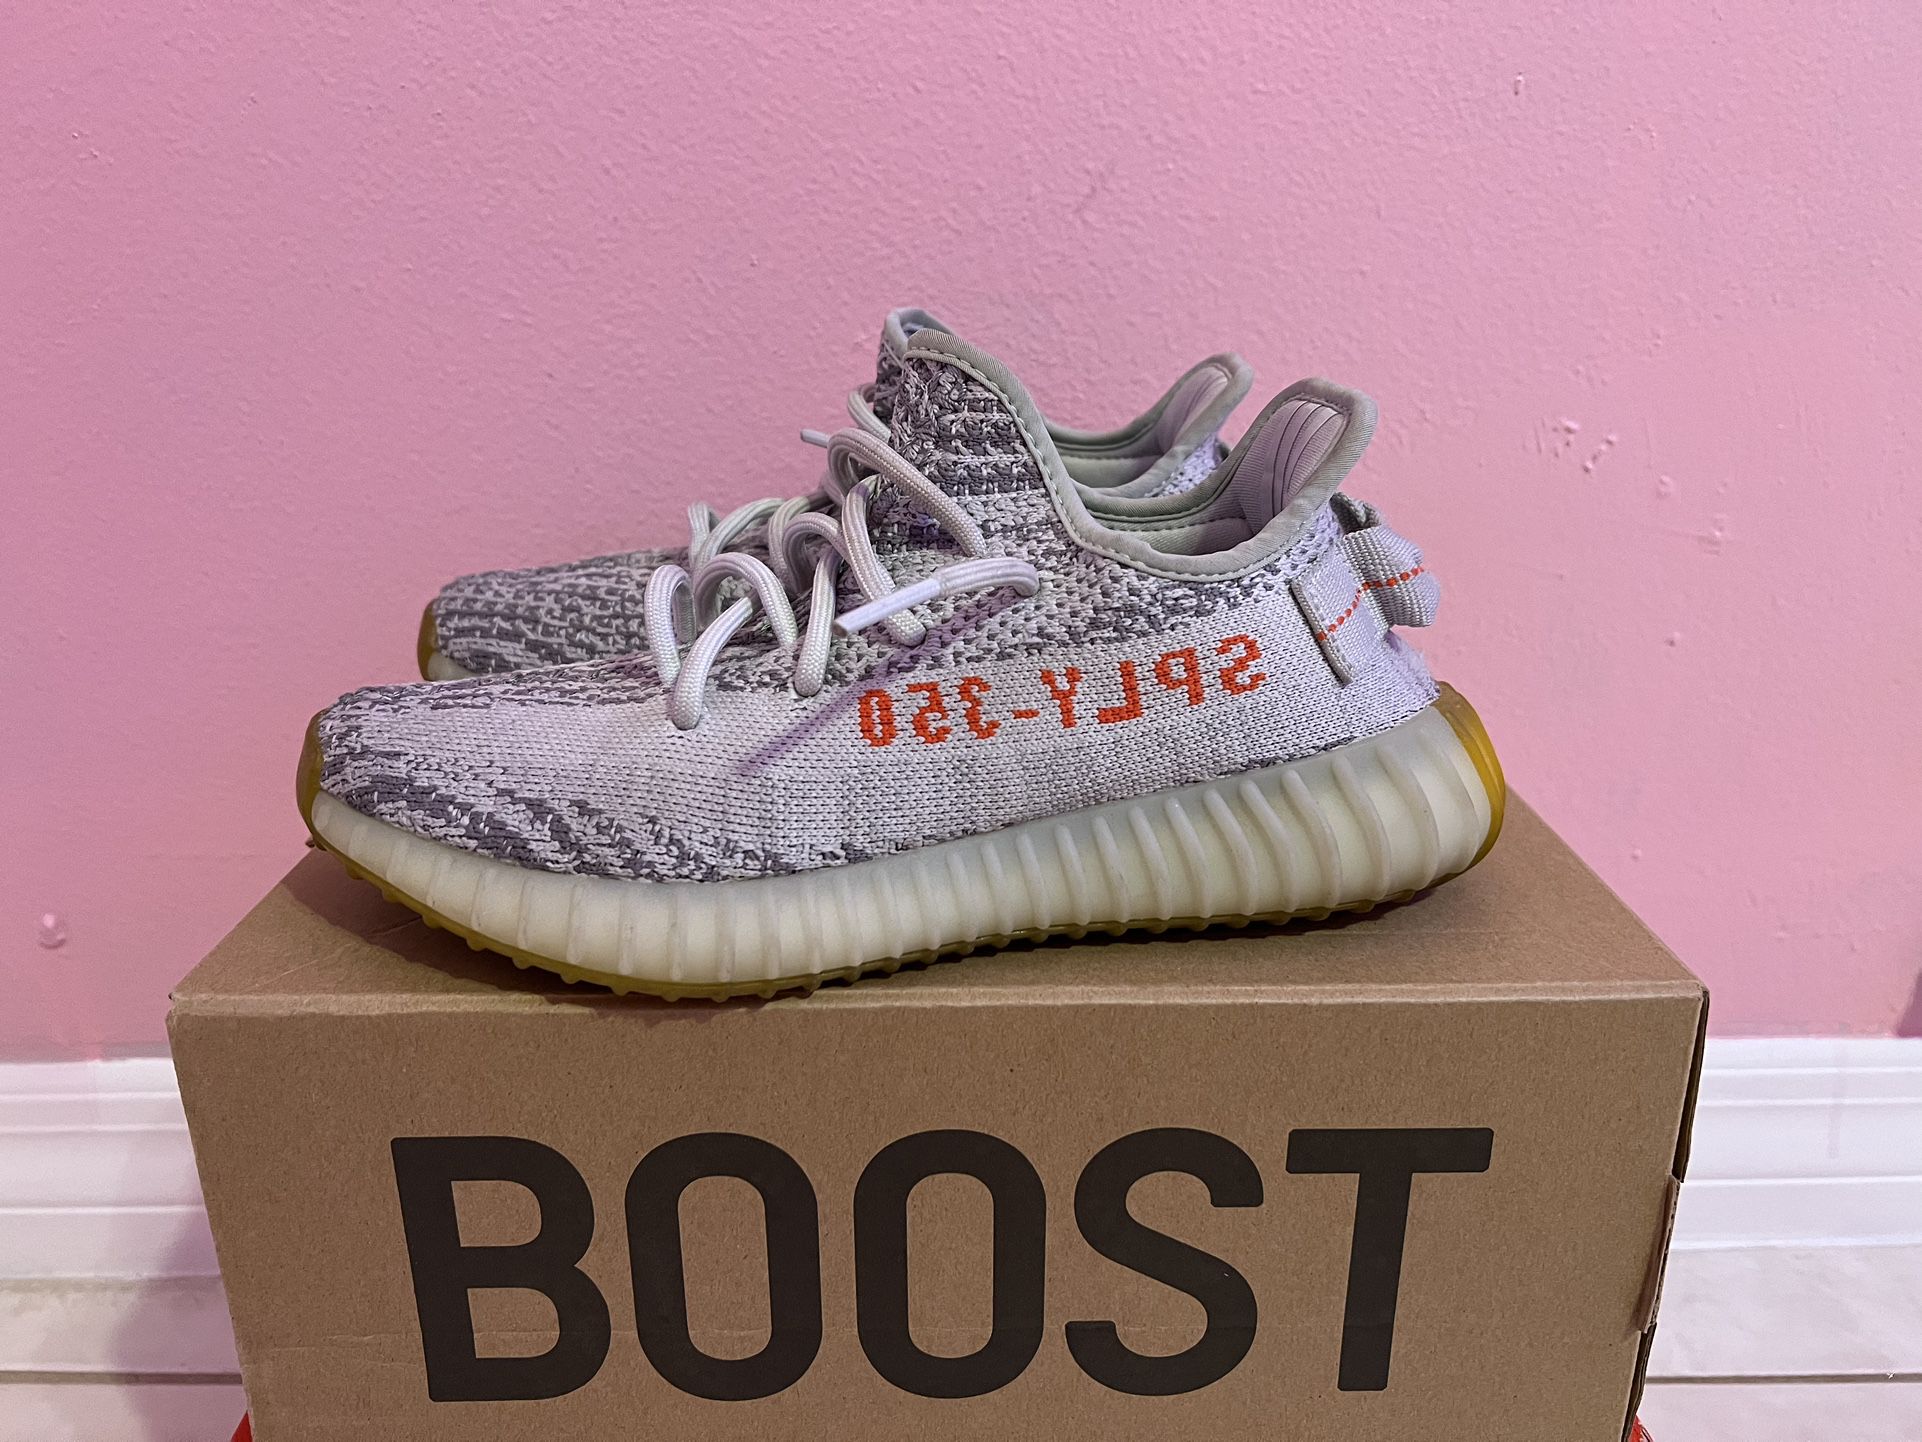 Yeezy Boost 350 V2 'Blue Tint' USED for Sale in St. Petersburg, FL OfferUp